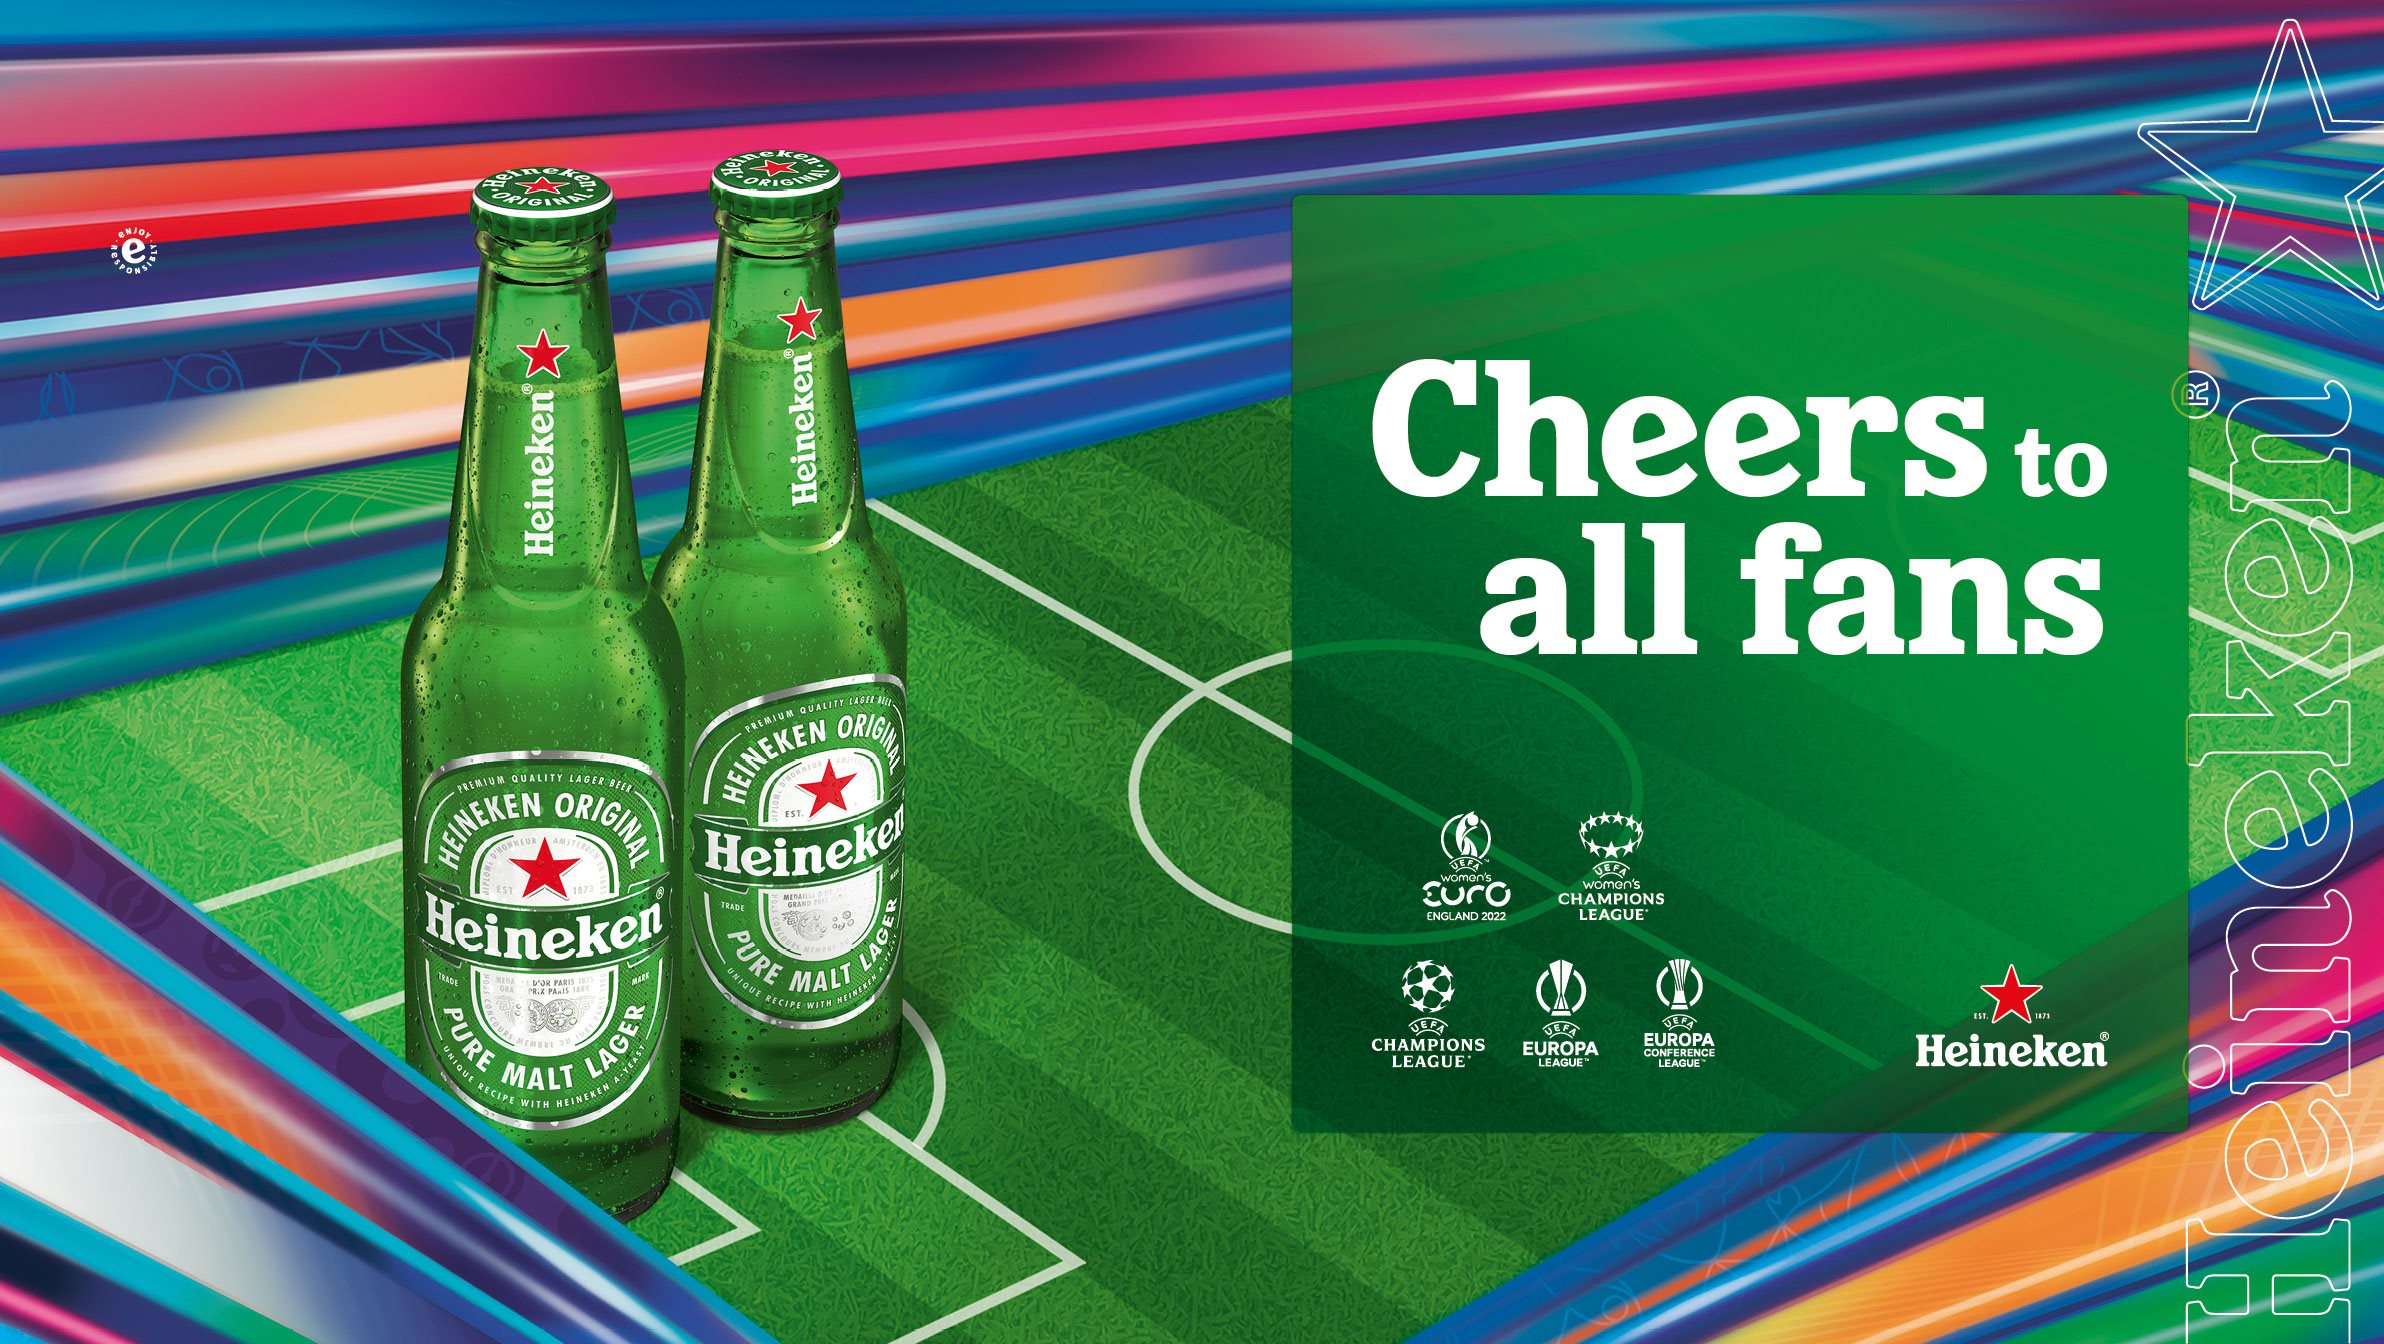 Heineken South Africa UCL 2022 (Cheers To All Fans) Hero Image (Downscaled) 2384X1344 Pixels